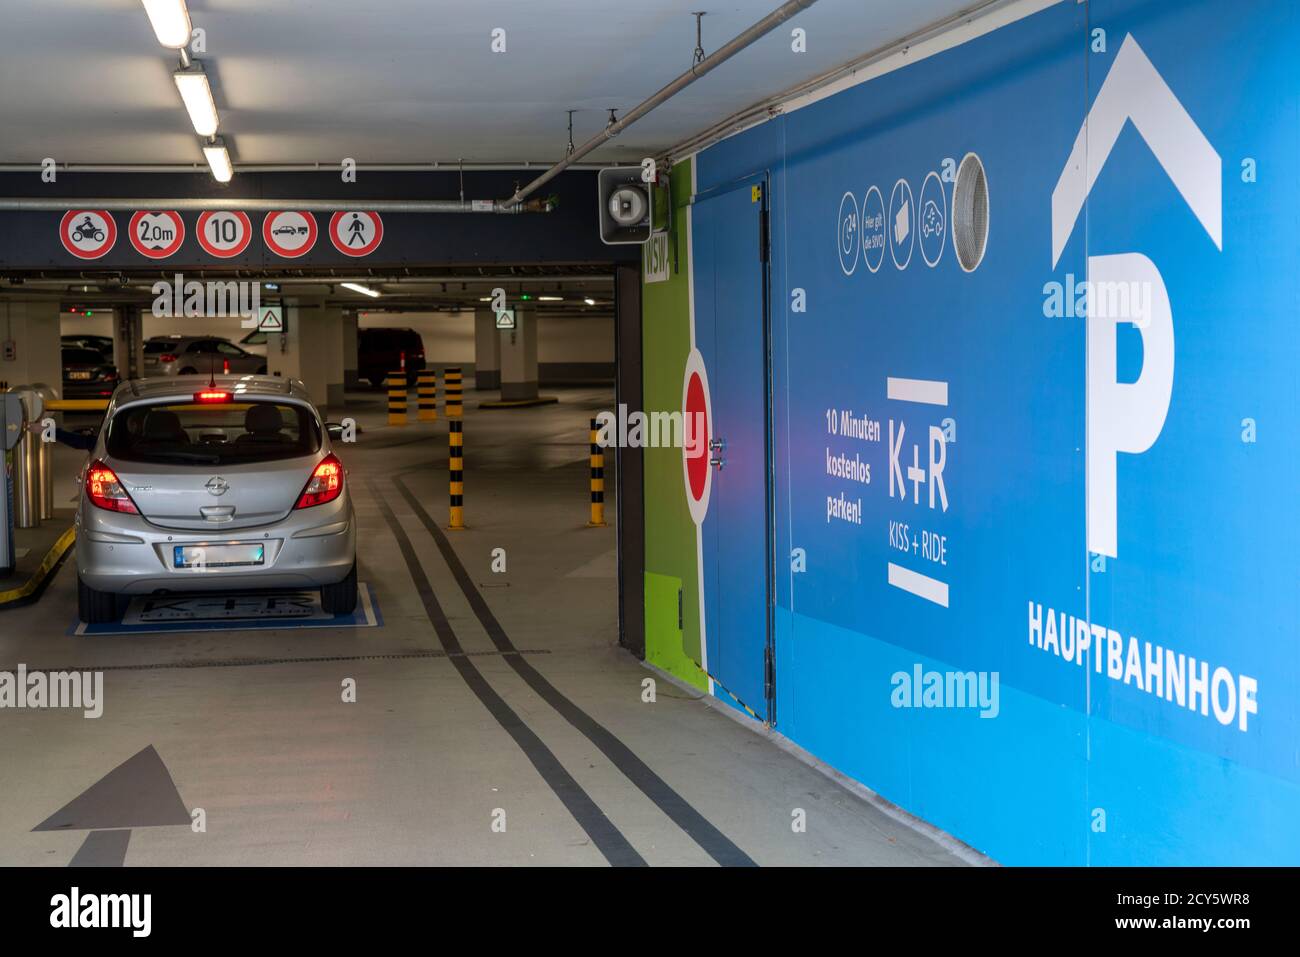 Parking garage at the main station, entrance for Kiss and Ride parking, 10 minutes free parking, to say goodbye to passengers, Wuppertal, NRW, Germany Stock Photo